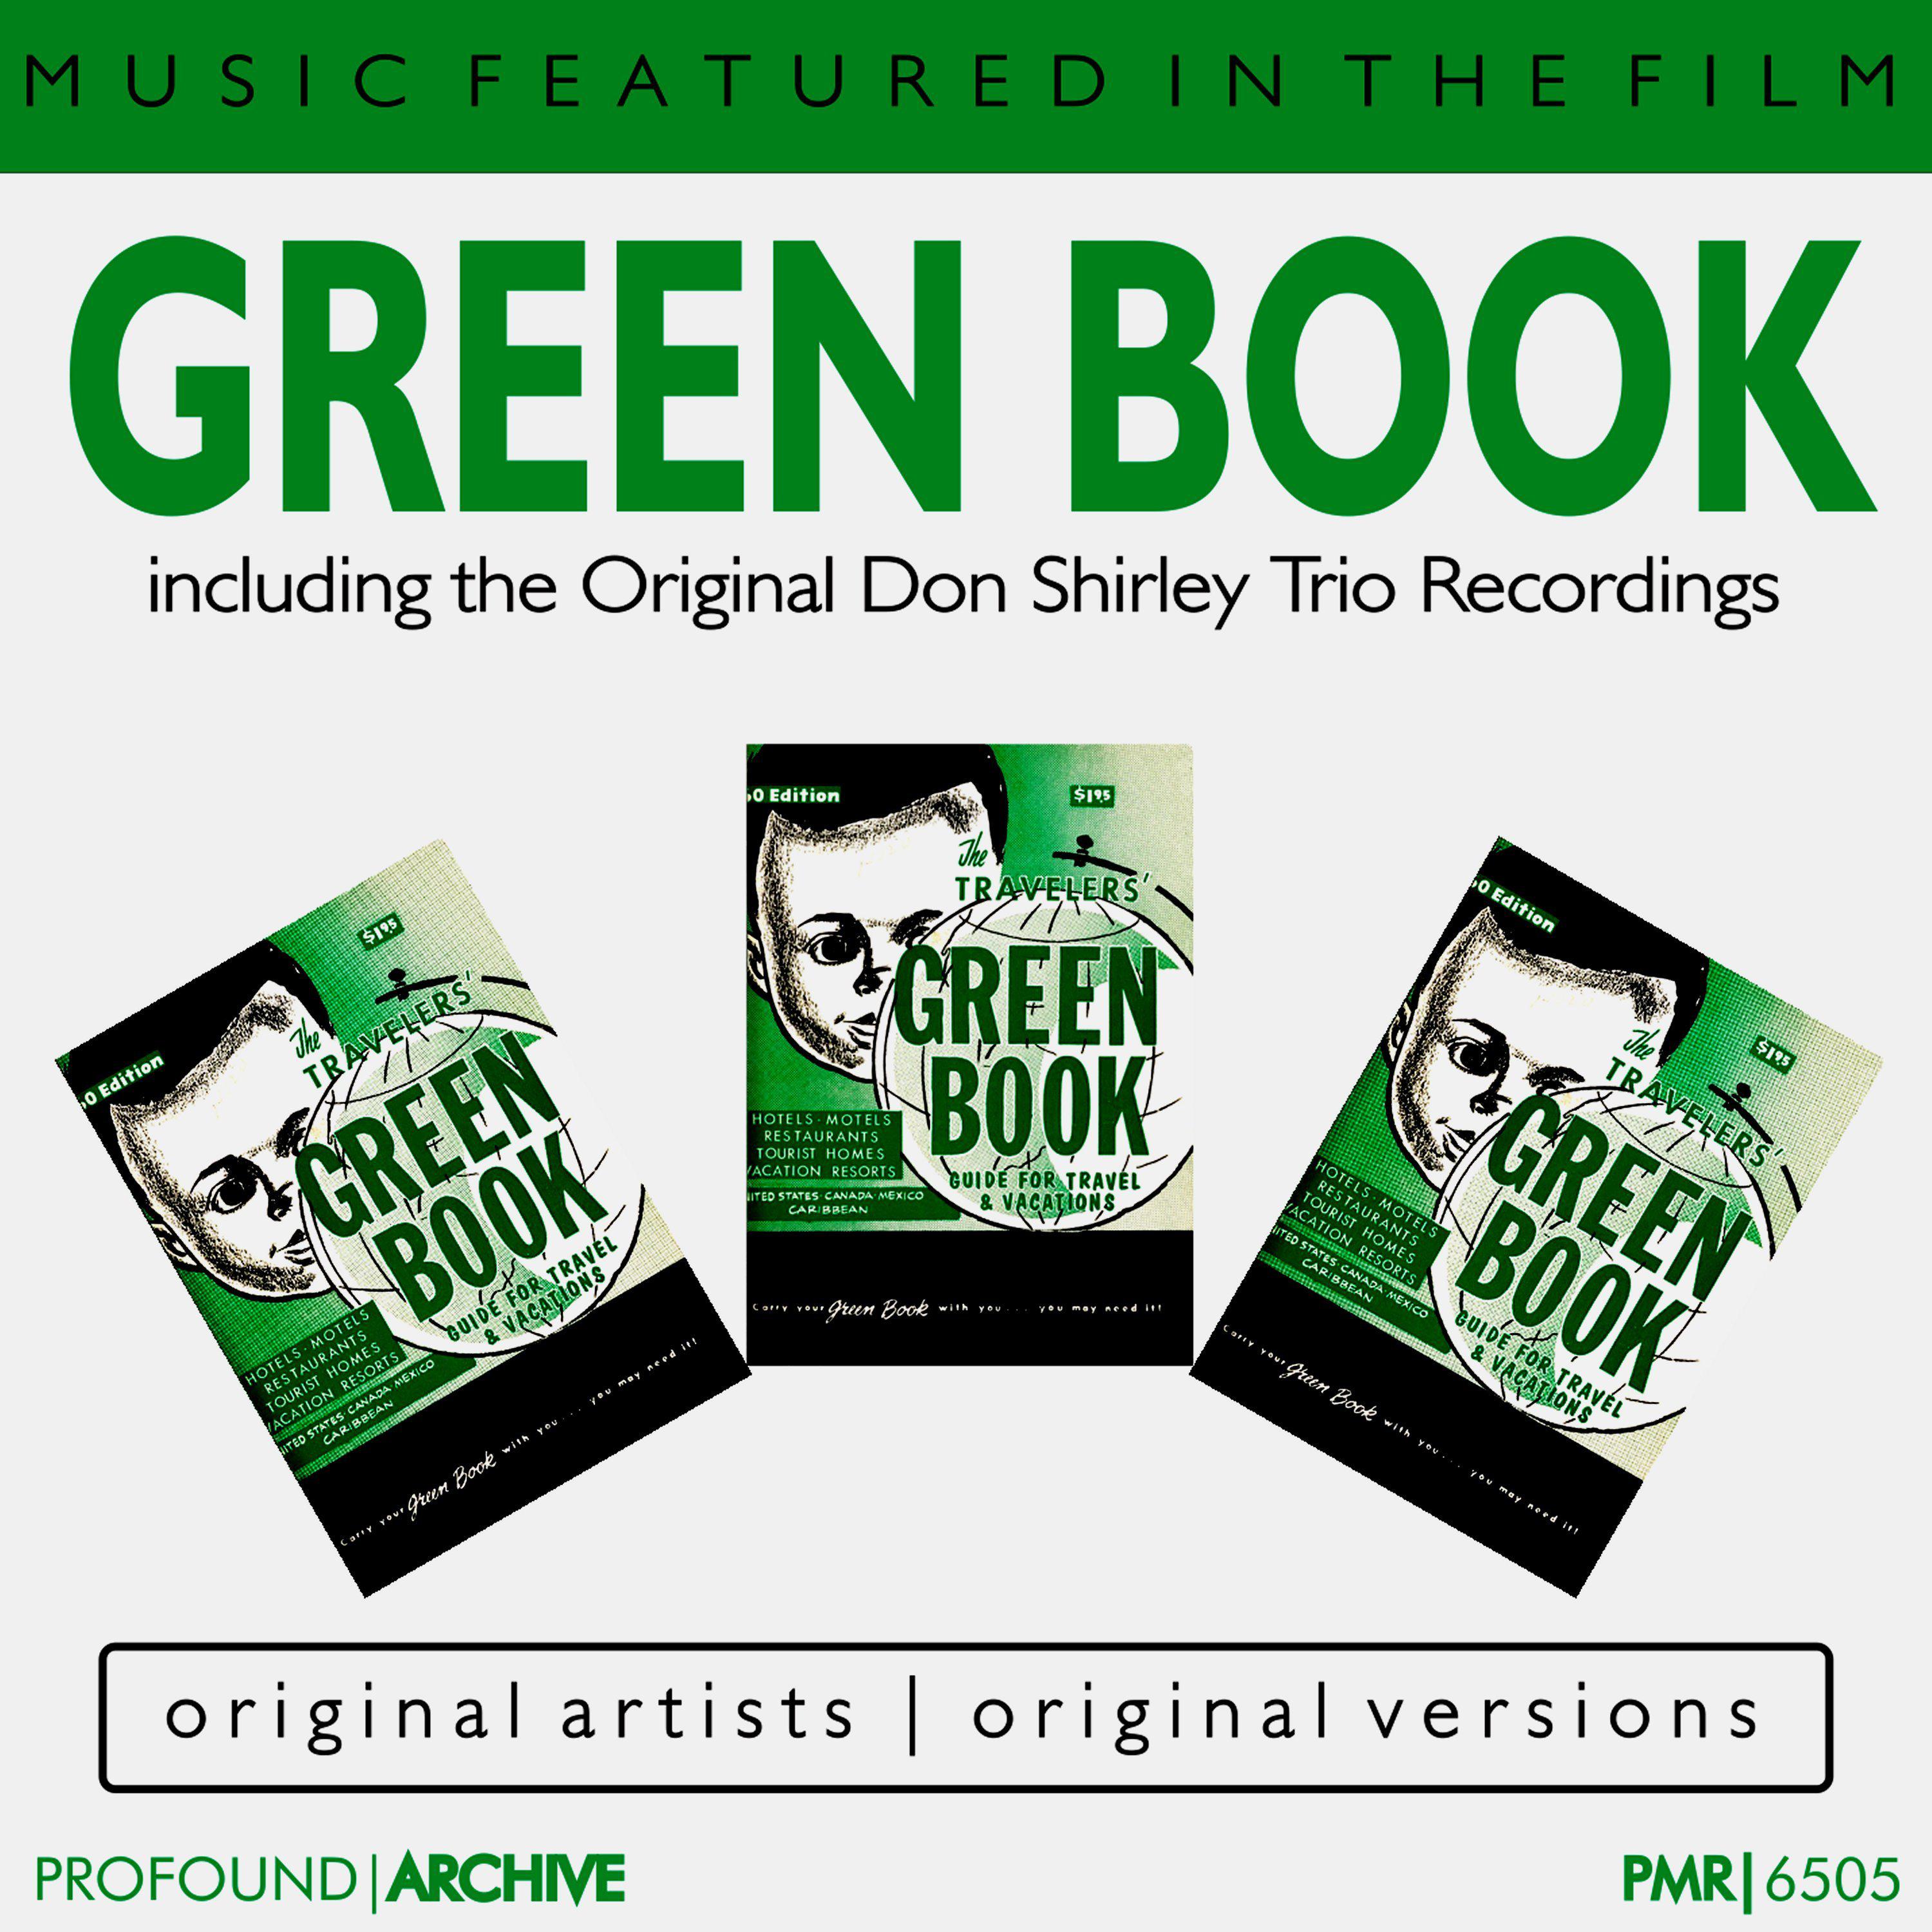 Music featured in the Film "Green Book" (Featuring the Original Don Shirley Trio Recordings)